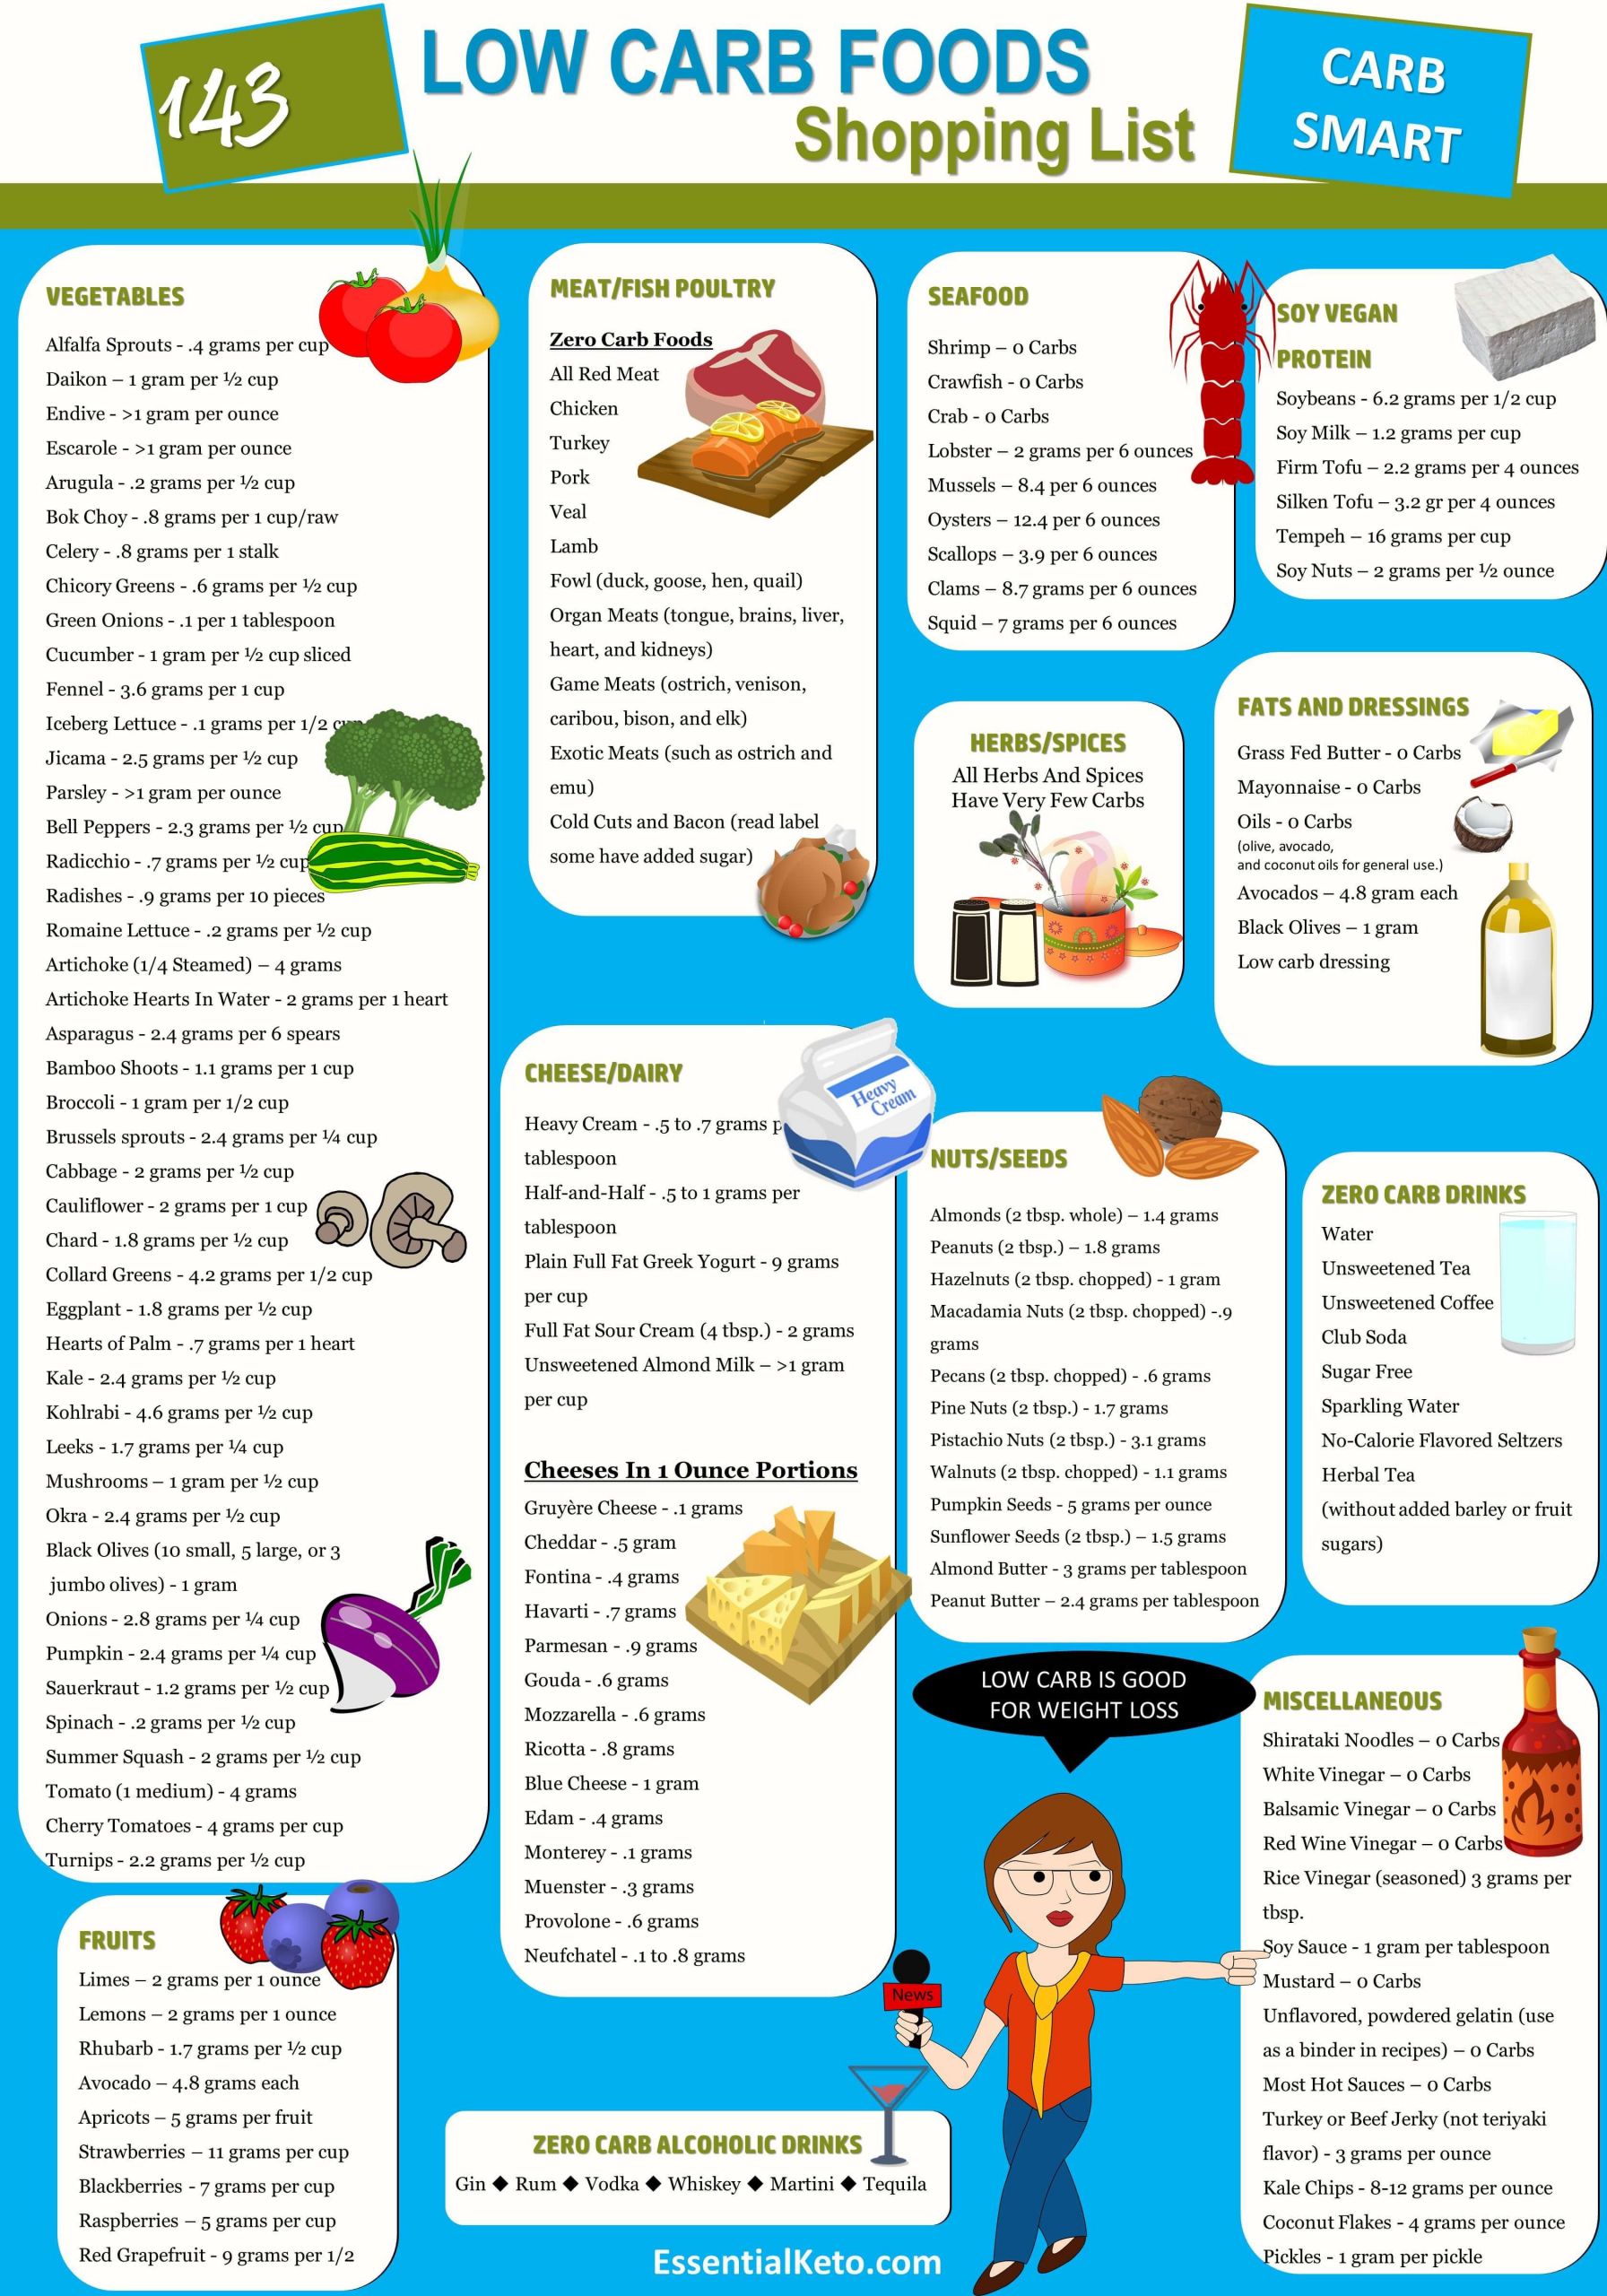 Low Carb Keto Diet Plan
 Ketogenic Diet Foods Shopping List